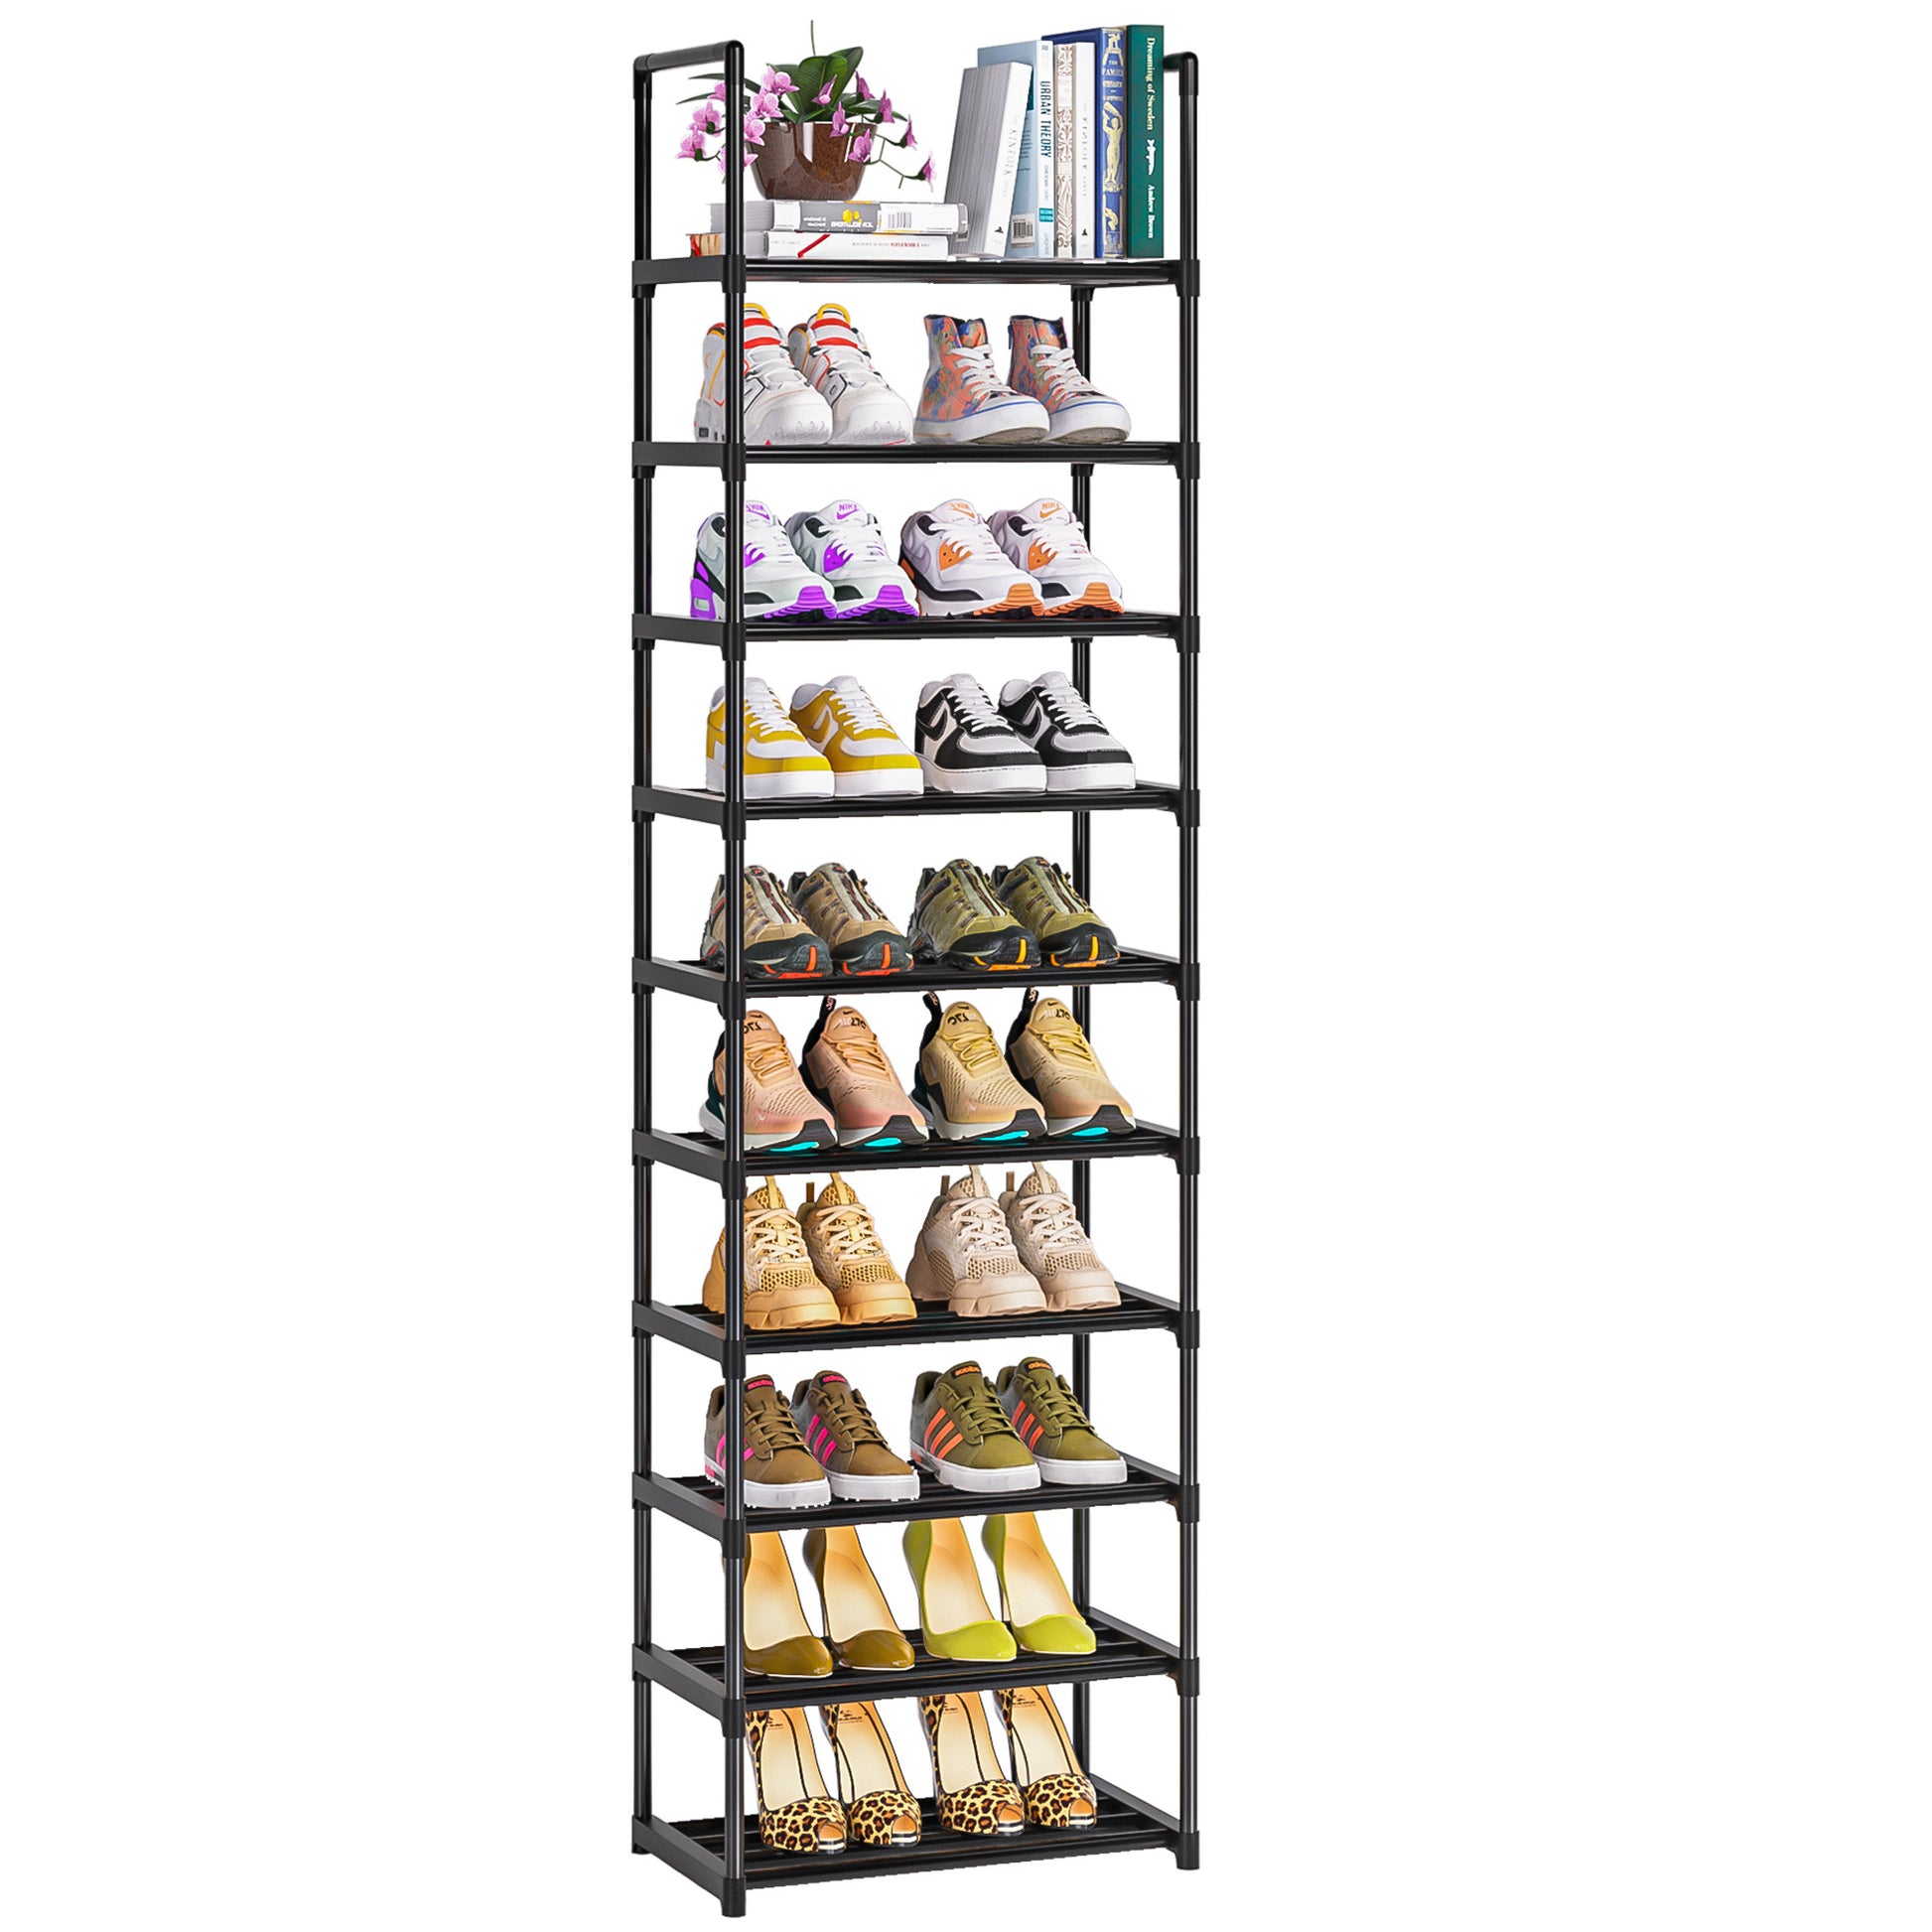 OYREL Shoe Rack, Shoe Storage Cabinet 32 Pairs Shoe Organizer Shelf Tall  Zapateras for Shoes Large Free Standing Racks Vertical Black Holder Stand